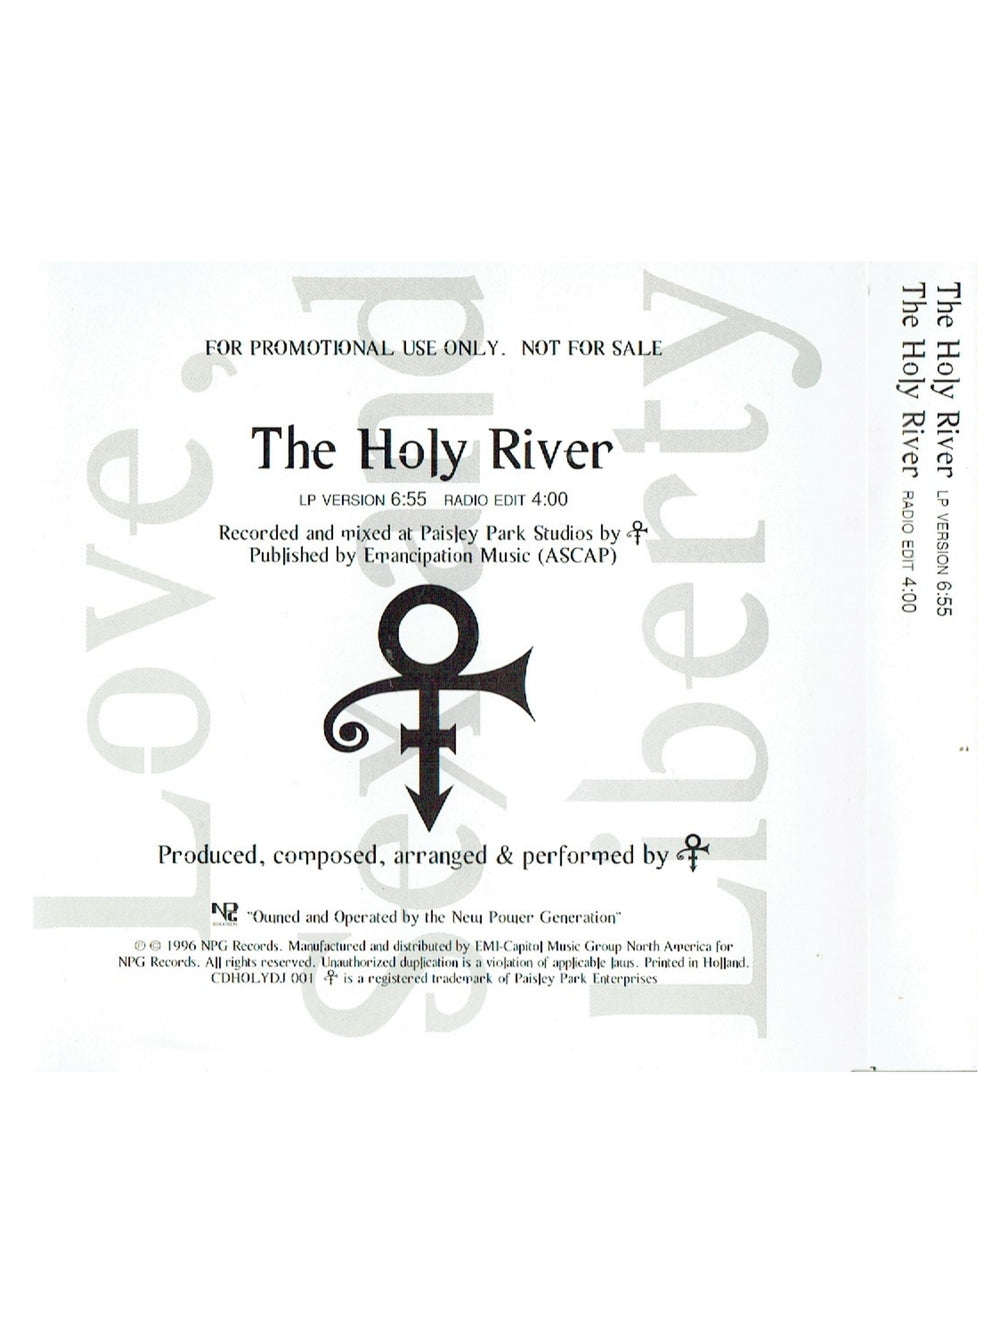 Prince – O(+>The Holy River Promotional Only CD Single 2 Tracks NPG Records